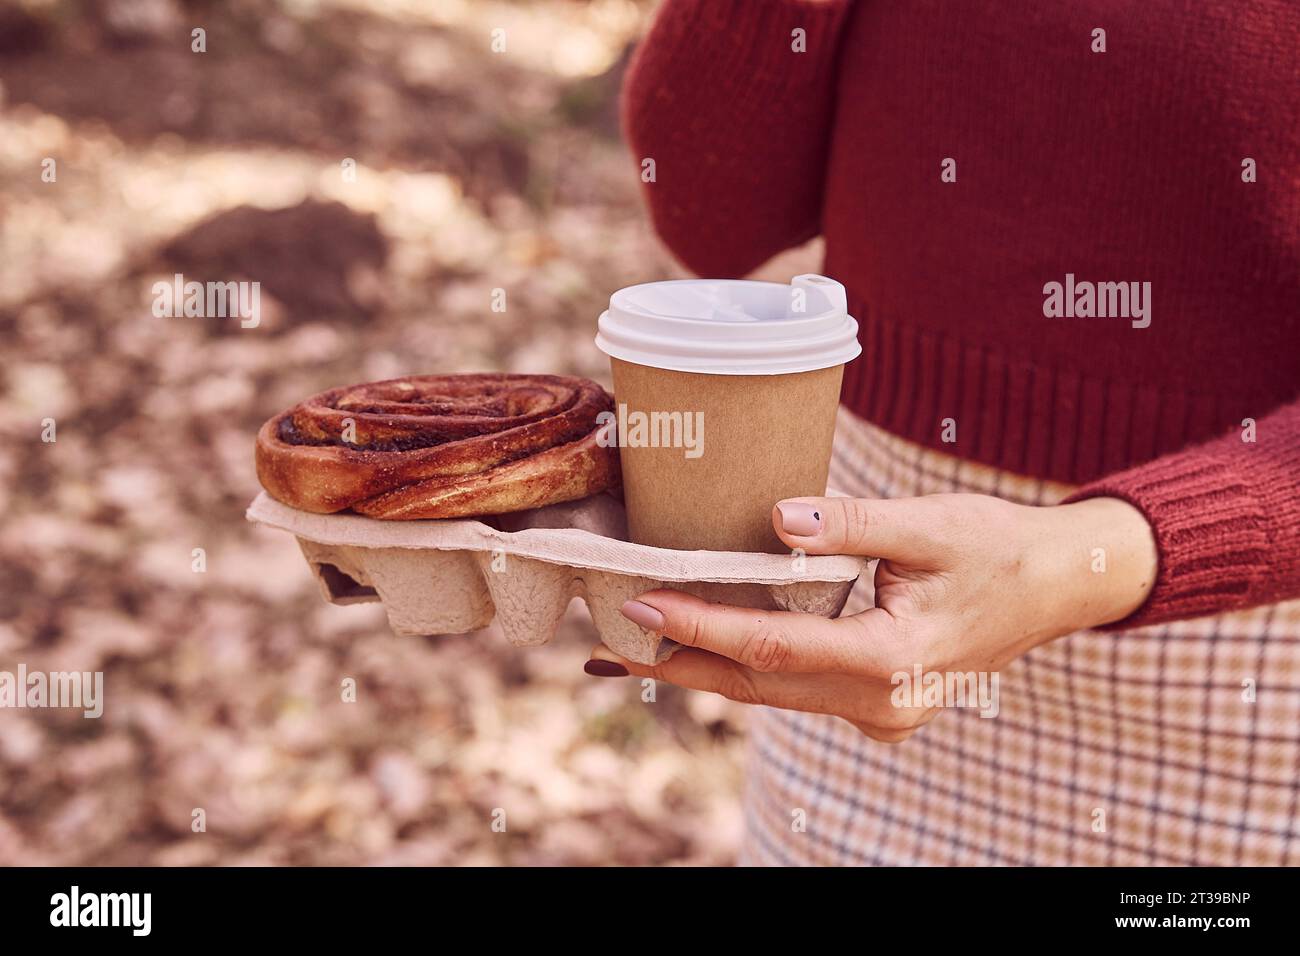 Woman walking in the park with cinnabon bun and coffee. Aesthetic autumn breakfast. Stock Photo